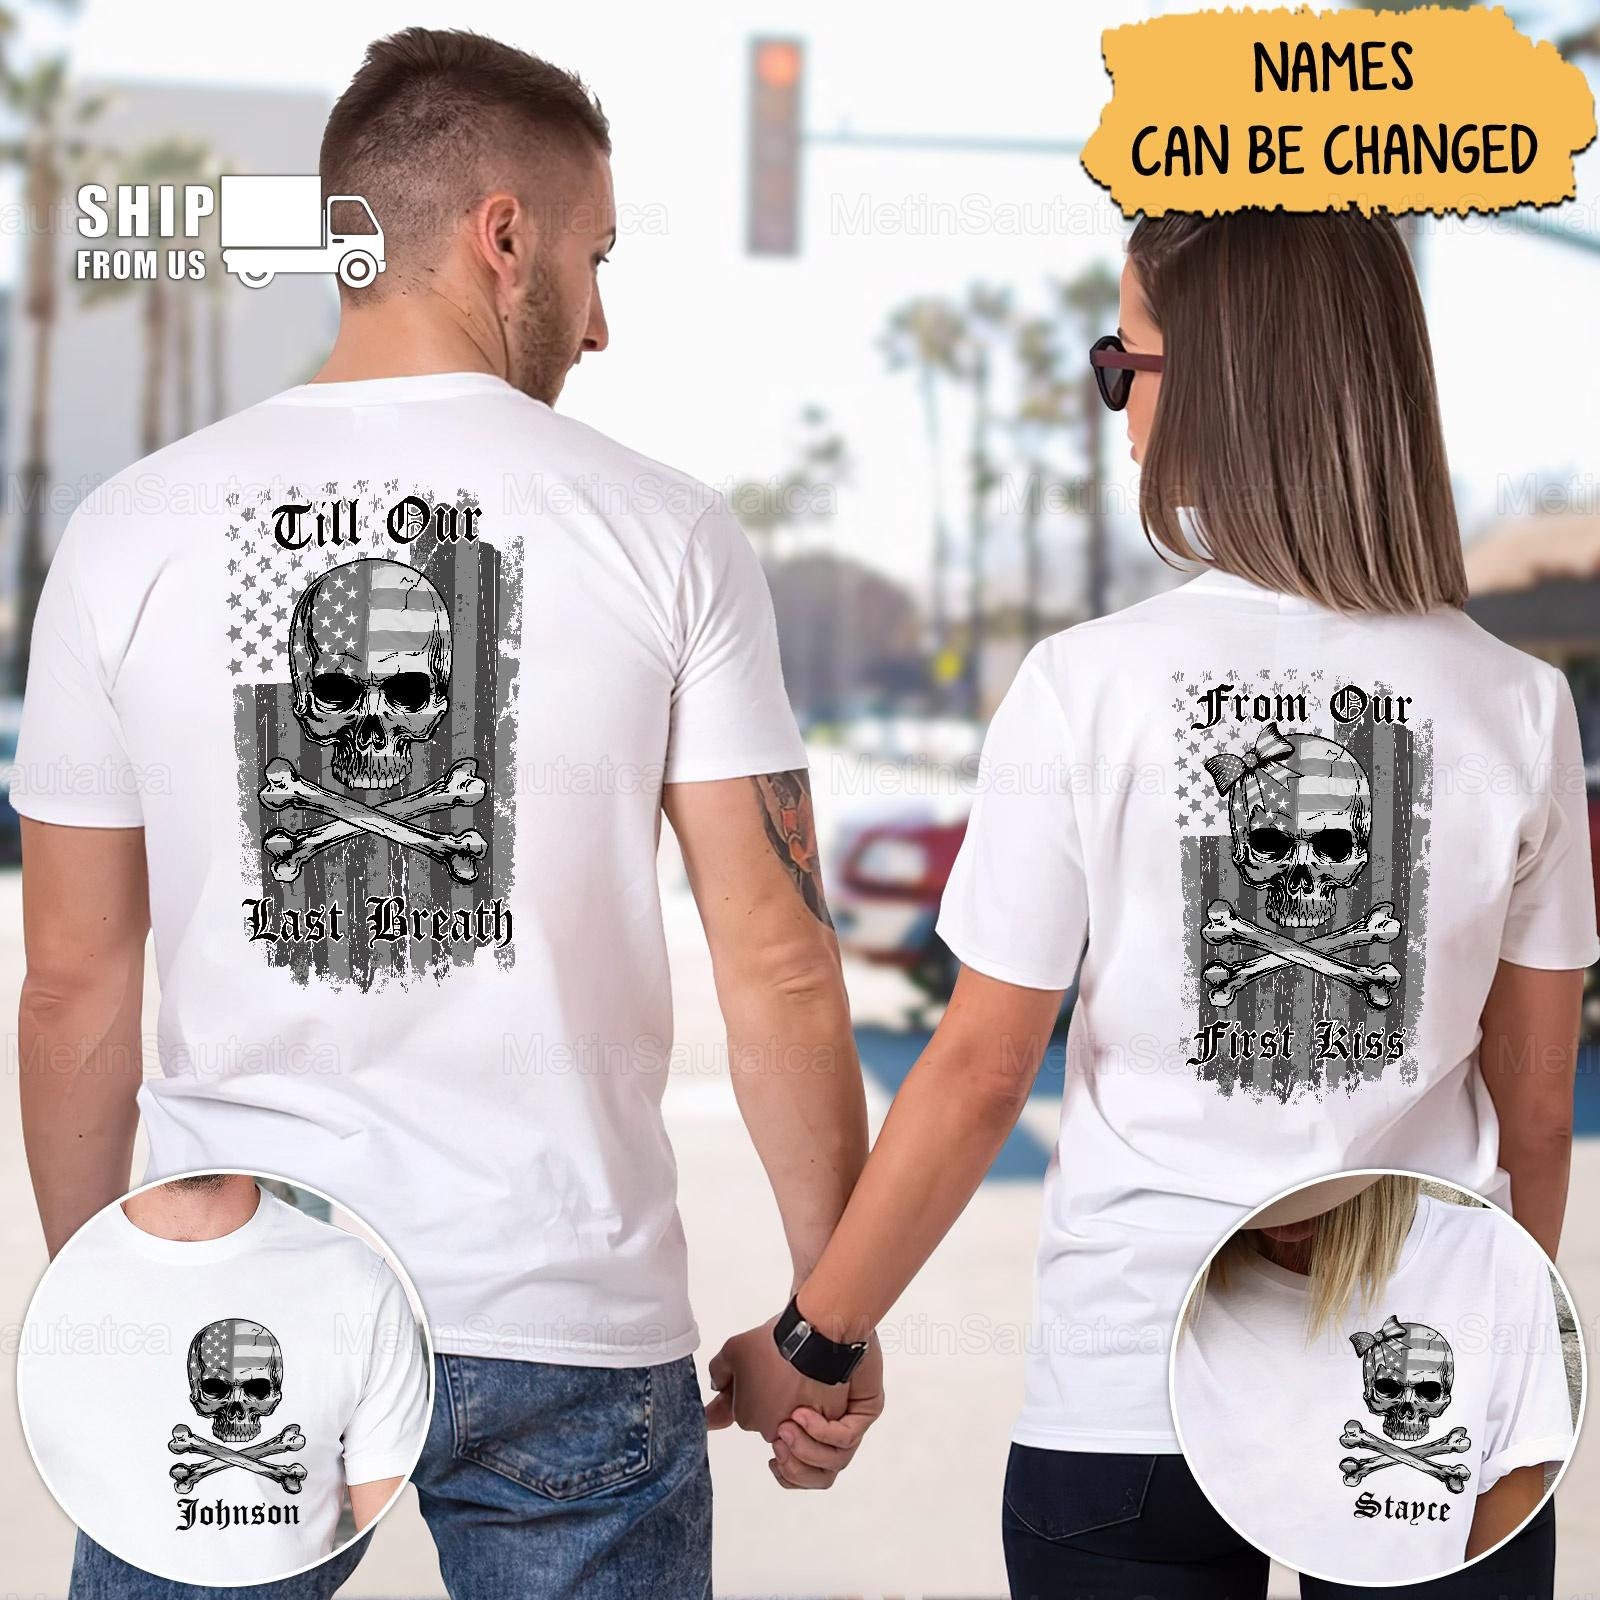 Couples Matching Shirts Matching Men Women Letter Print Love Couple T-Shirt  Blouse Tops Clothes Valentine